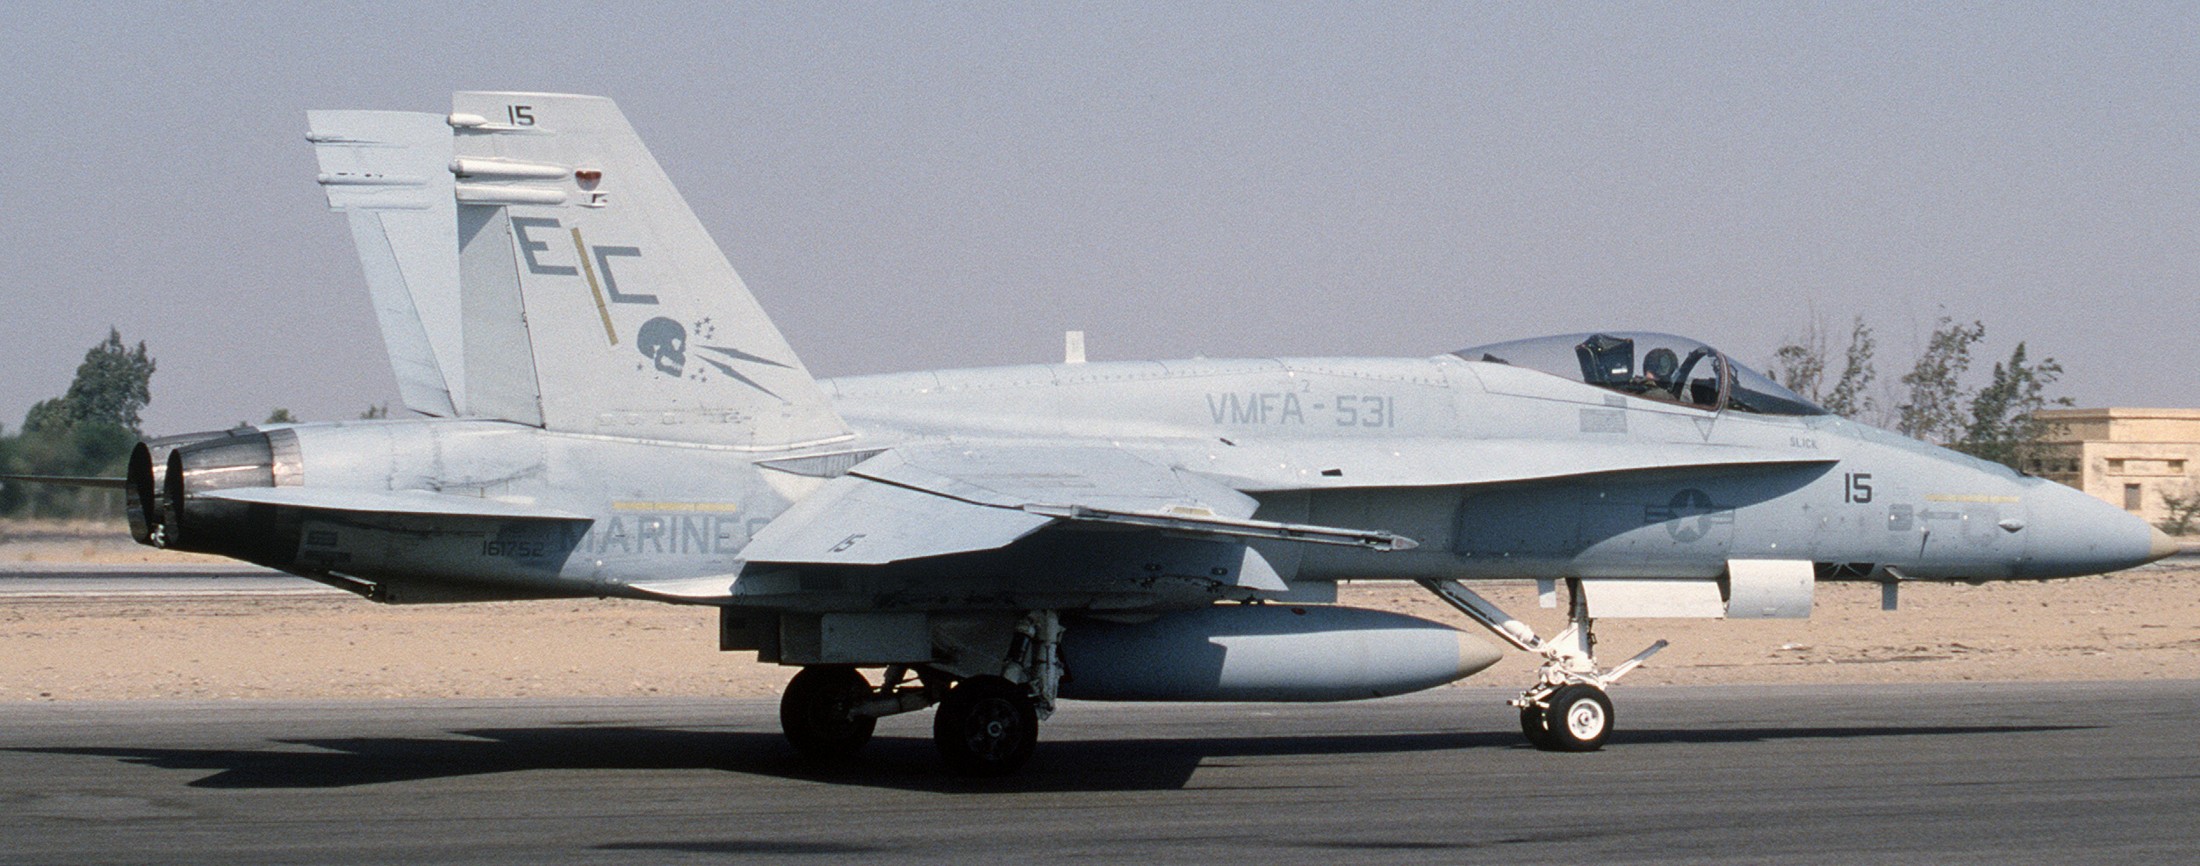 vmfa-531 grey ghosts marine fighter attack squadron f/a-18a hornet usmc 16 kairo west air base egypt